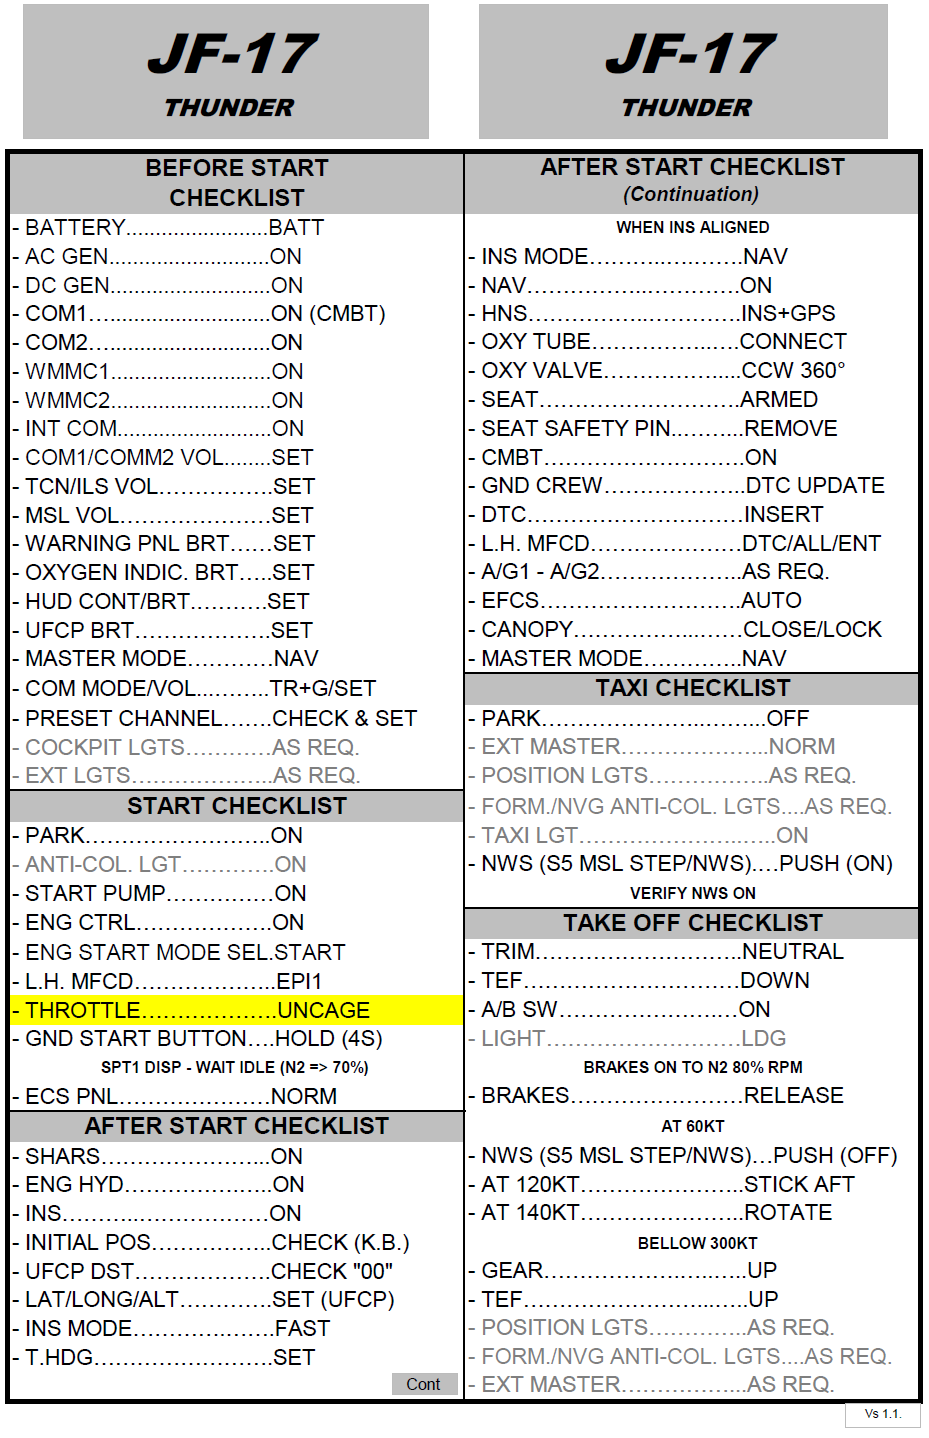 JF-17 Quick Checklist (Day and Night Ops). (Update vs 1.1)